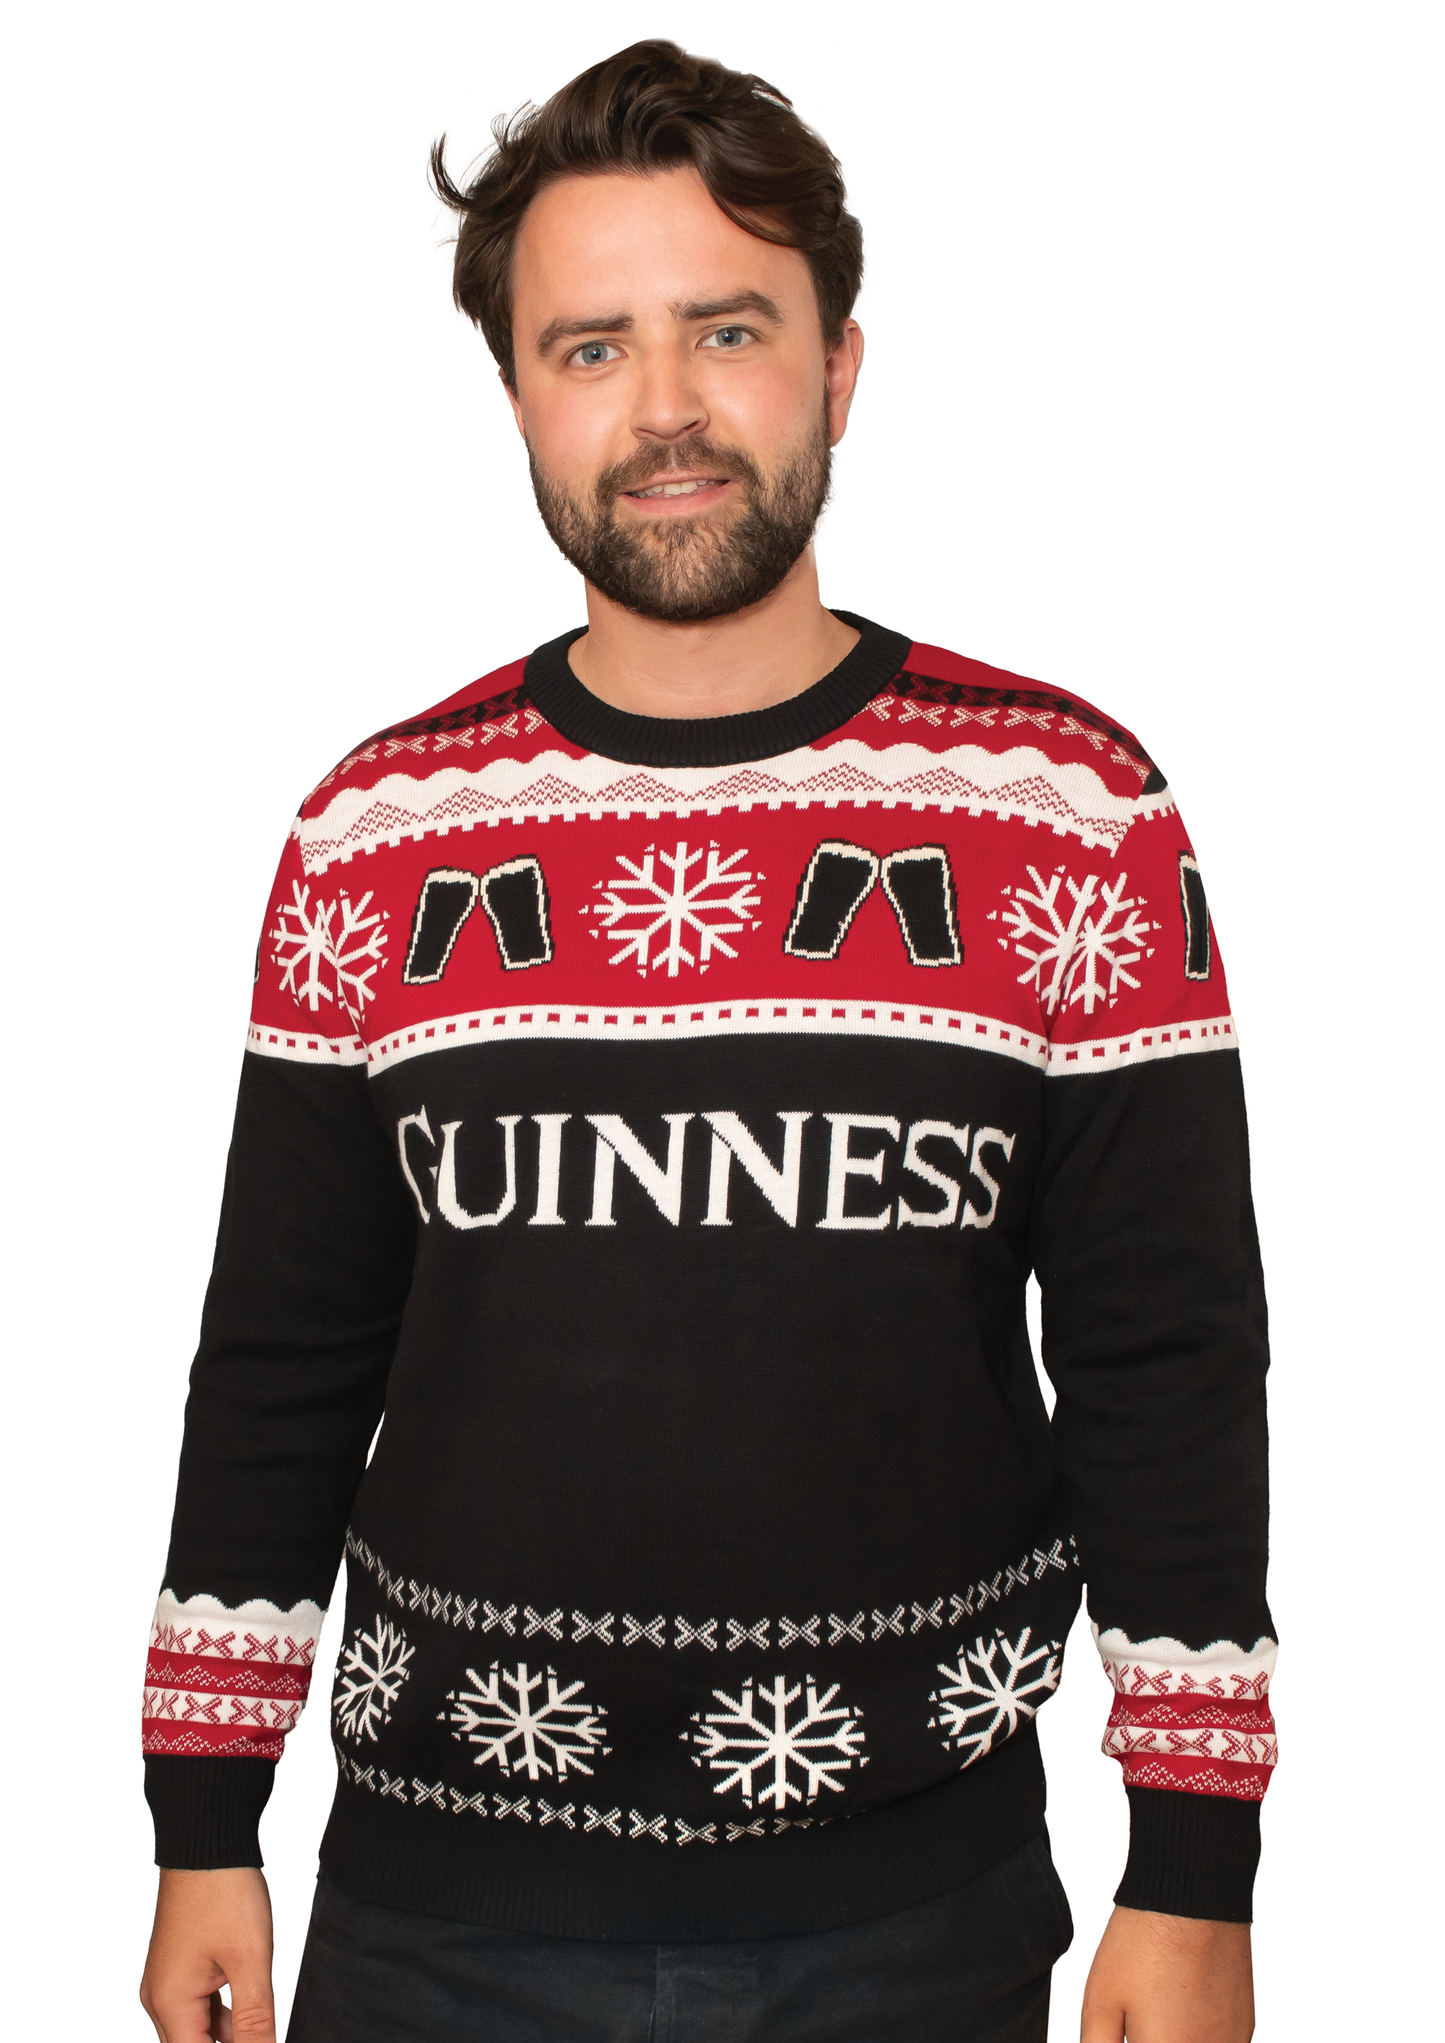 A man wearing a festive Official Guinness Christmas Jumper, made by Guinness UK.